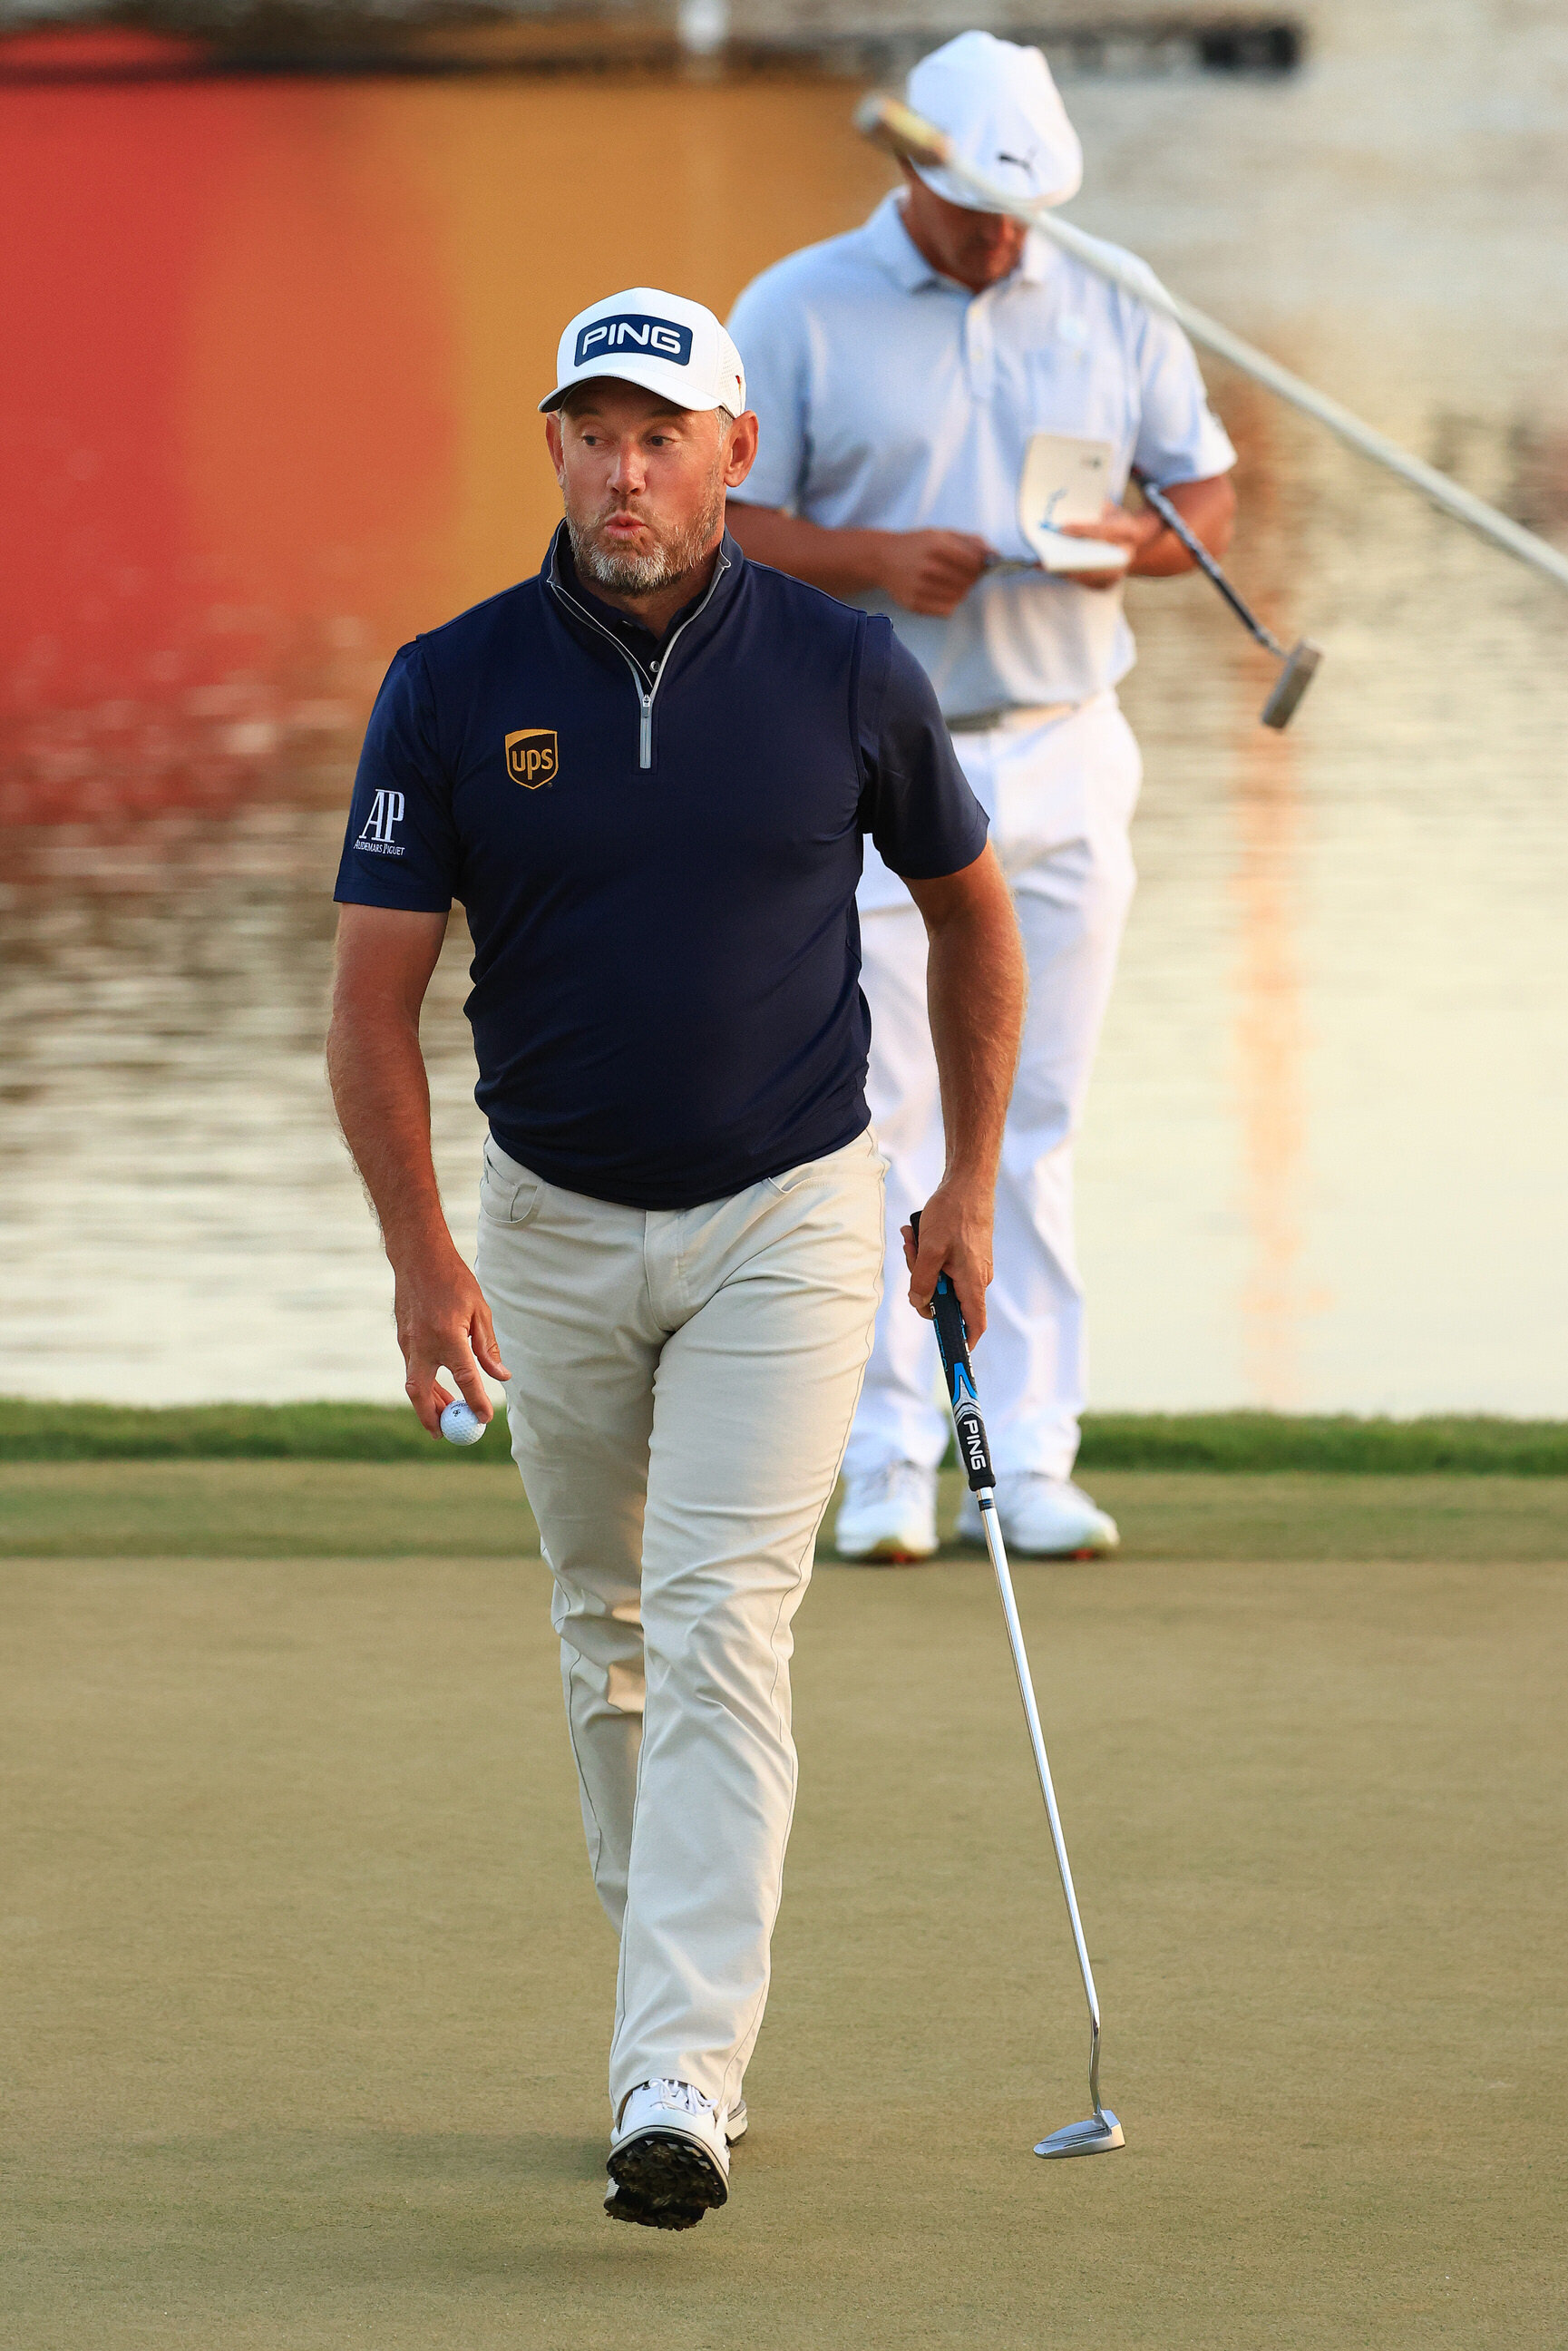  ORLANDO, FLORIDA - MARCH 07: Lee Westwood of England reacts after making a putt for par on the 18th green during the final round of the Arnold Palmer Invitational Presented by MasterCard at the Bay Hill Club and Lodge on March 07, 2021 in Orlando, F